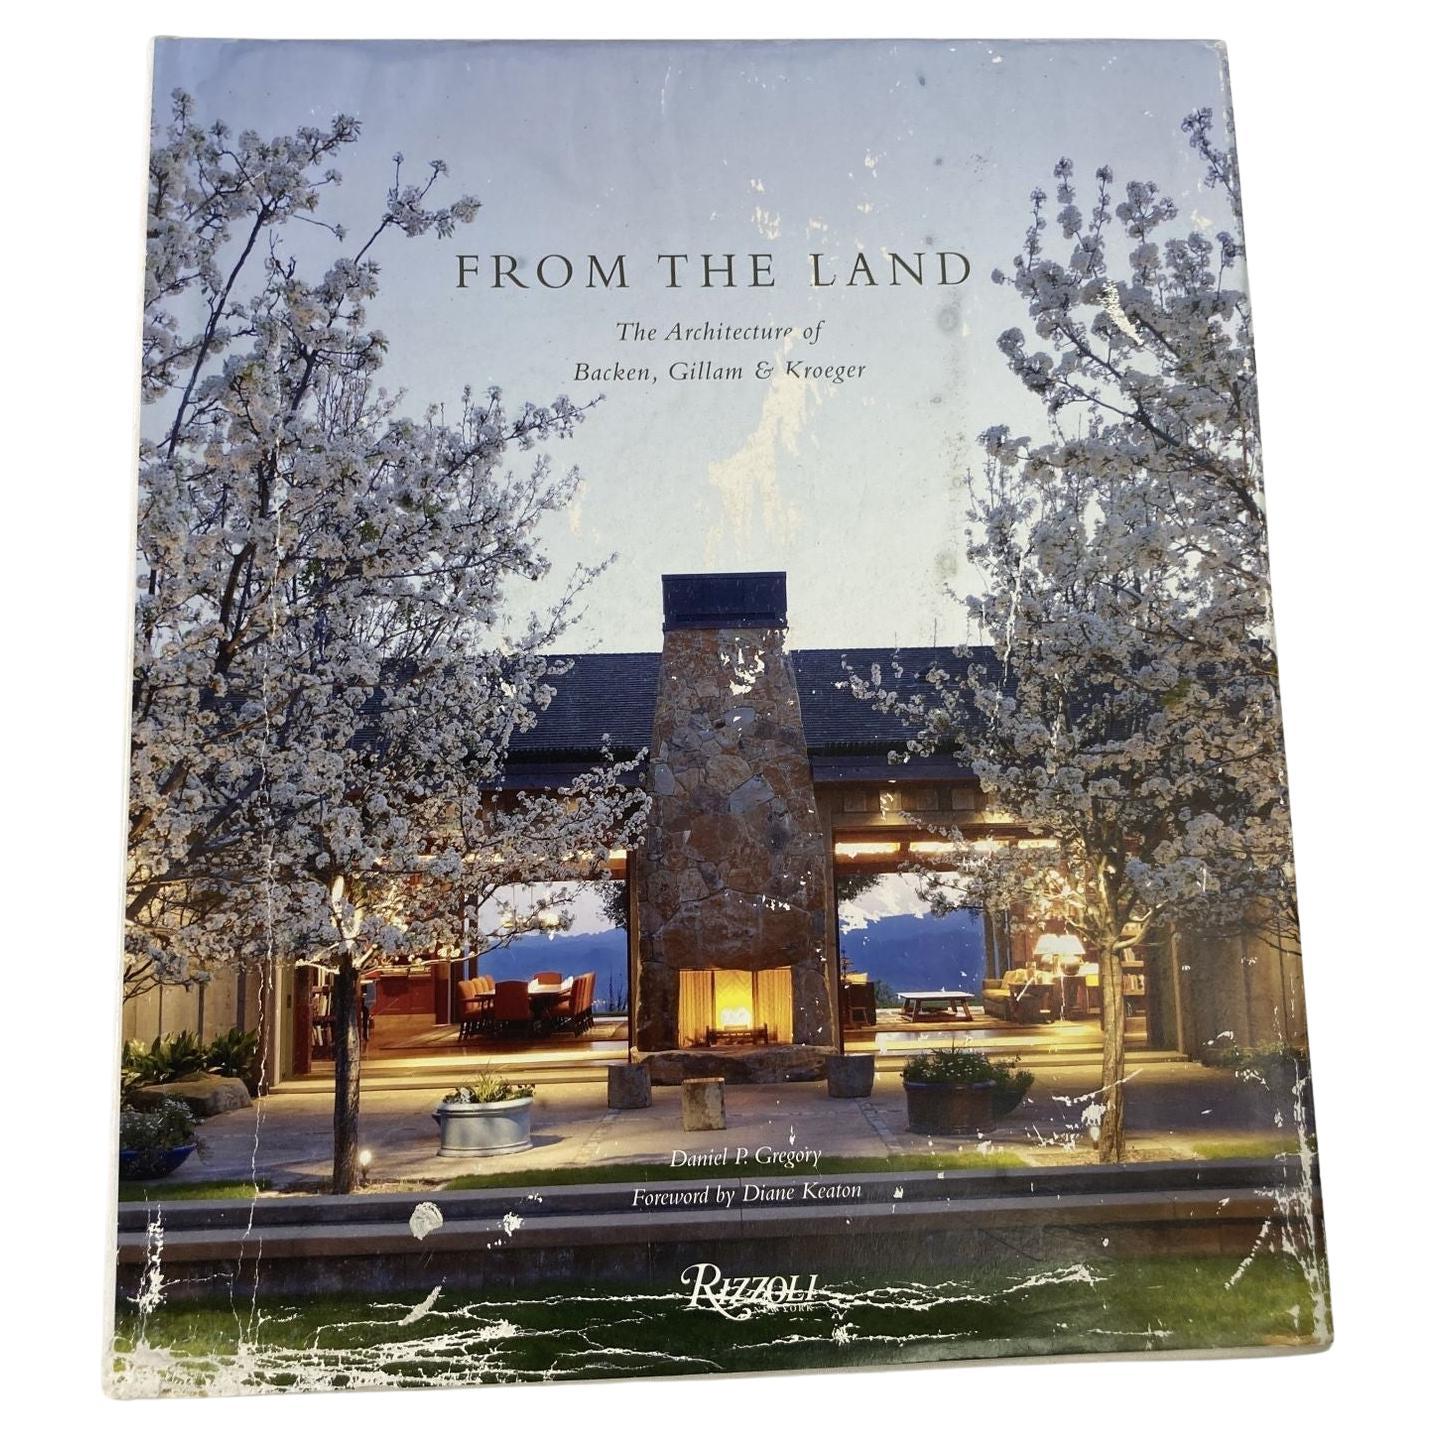 From the Land Backen, Gillam, & Kroeger Architects Hardcover Book